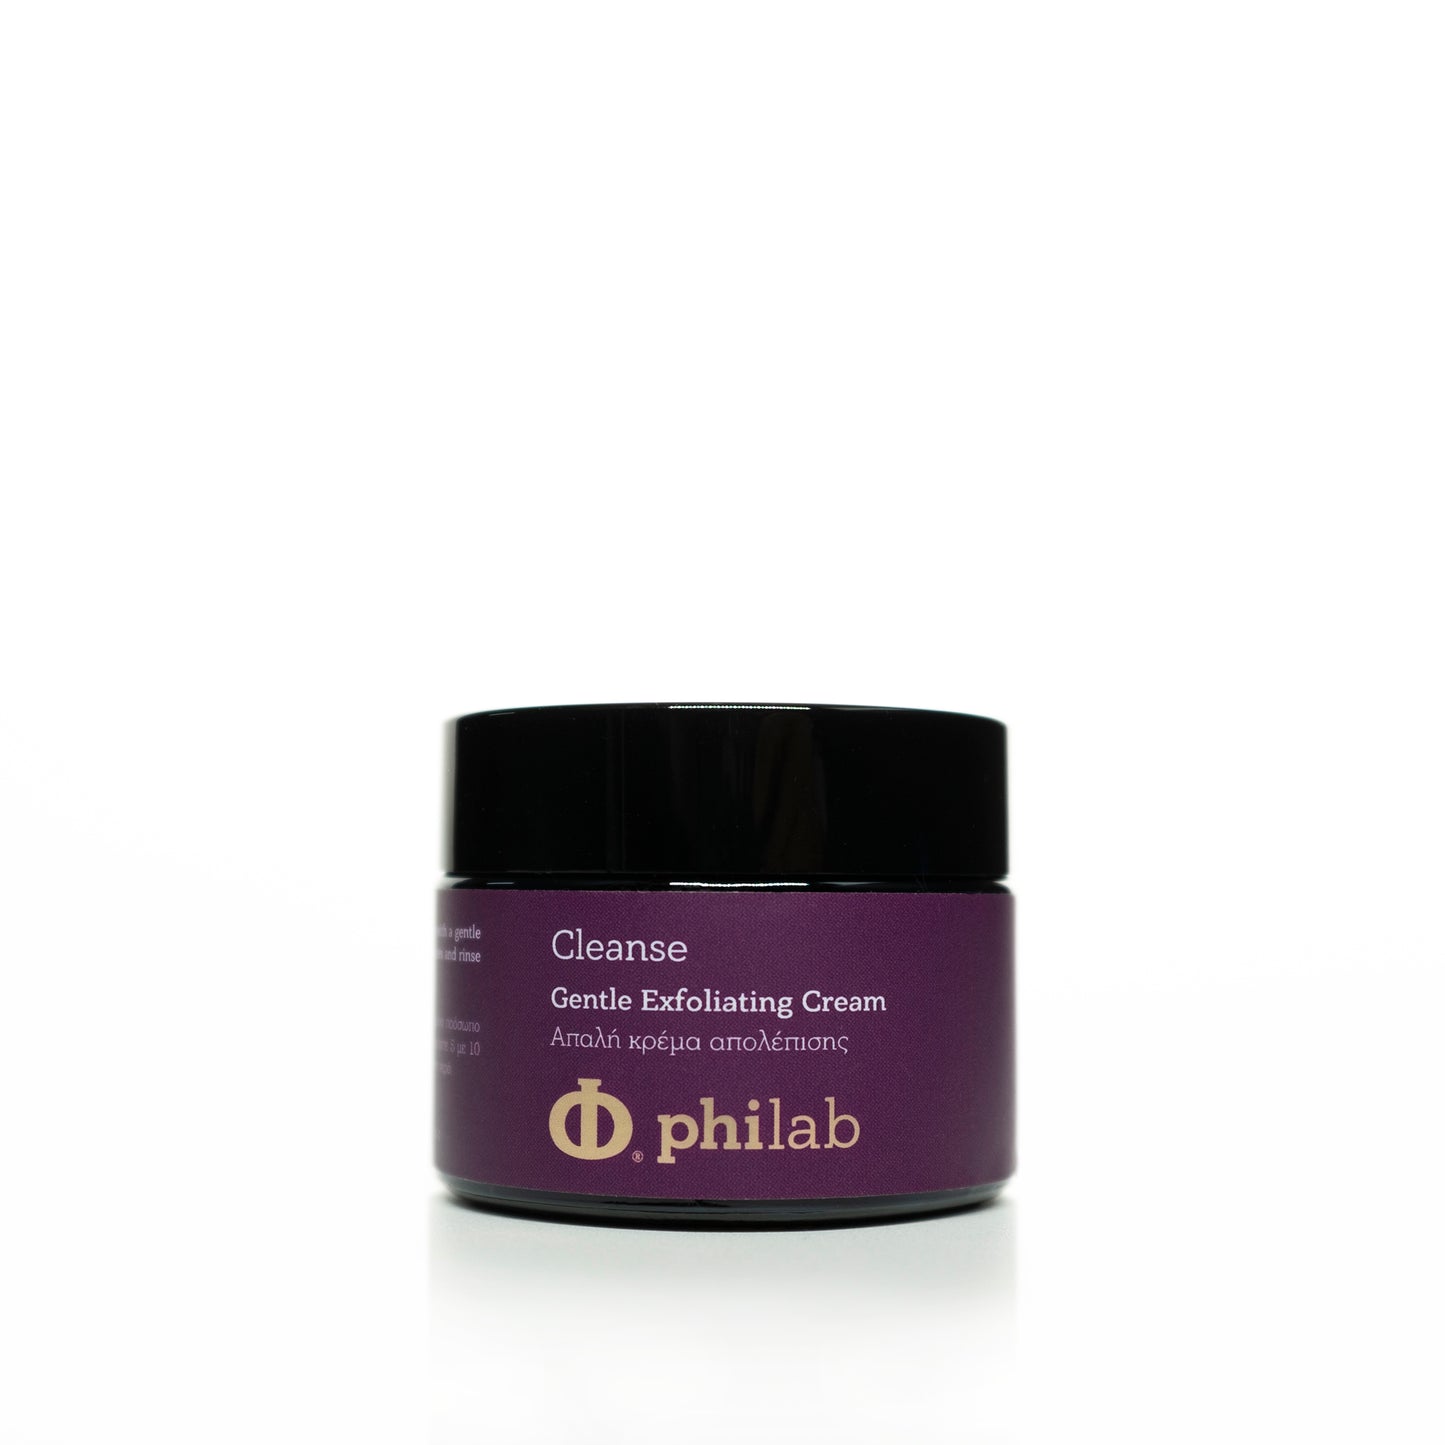 Philab Gentle Exfoliating Cream in a violet jar with black lid on white background.